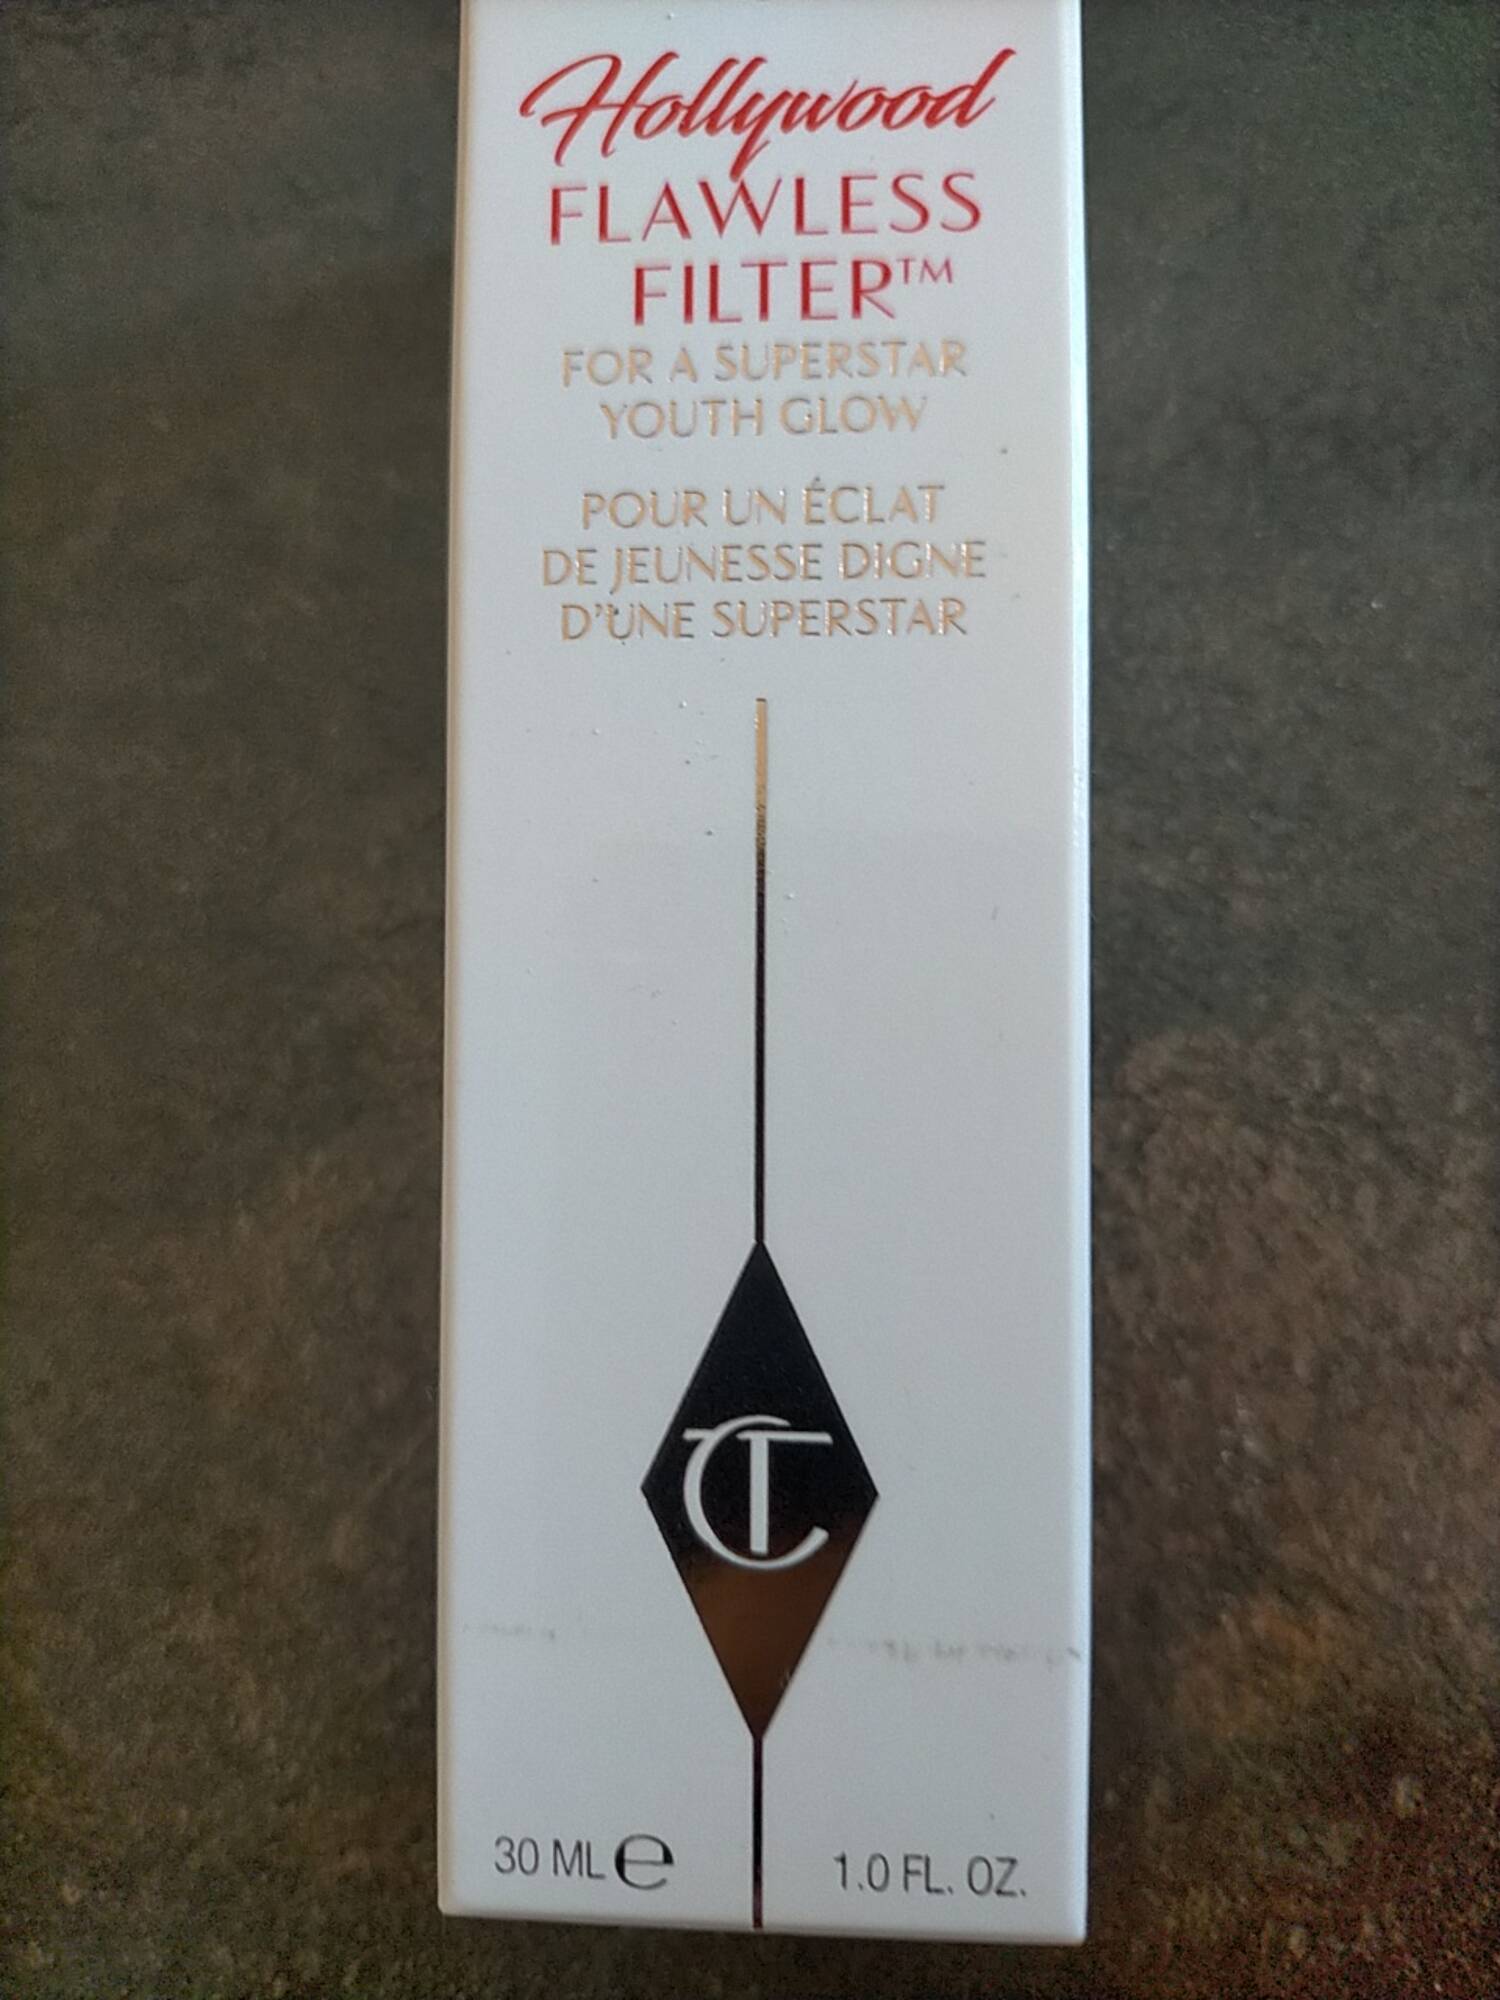 CHARLOTTE TILBURY - Hollywood flawless filter for superstar youth glow